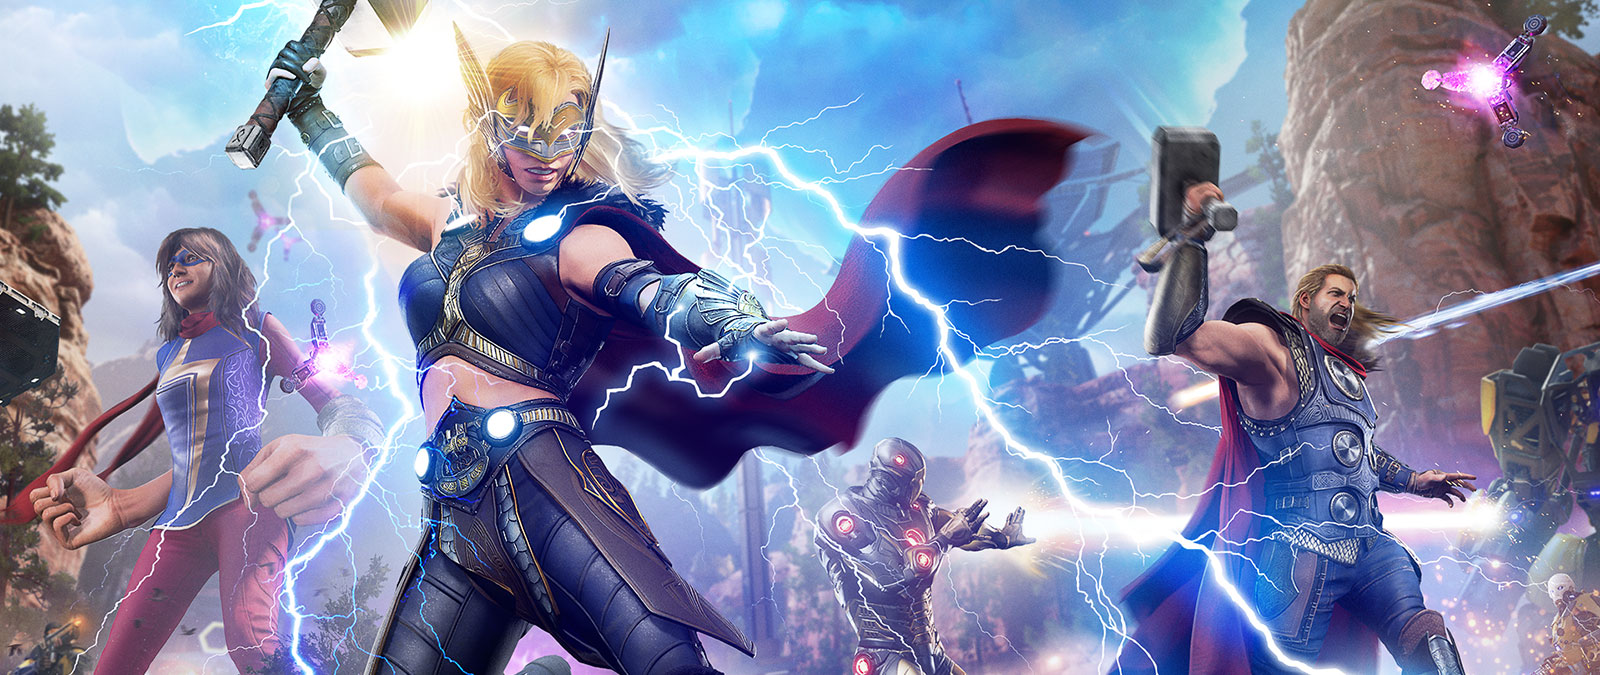 Jane Foster, the Mighty Thor, loses a bolt of lightning on a mechanical foe.